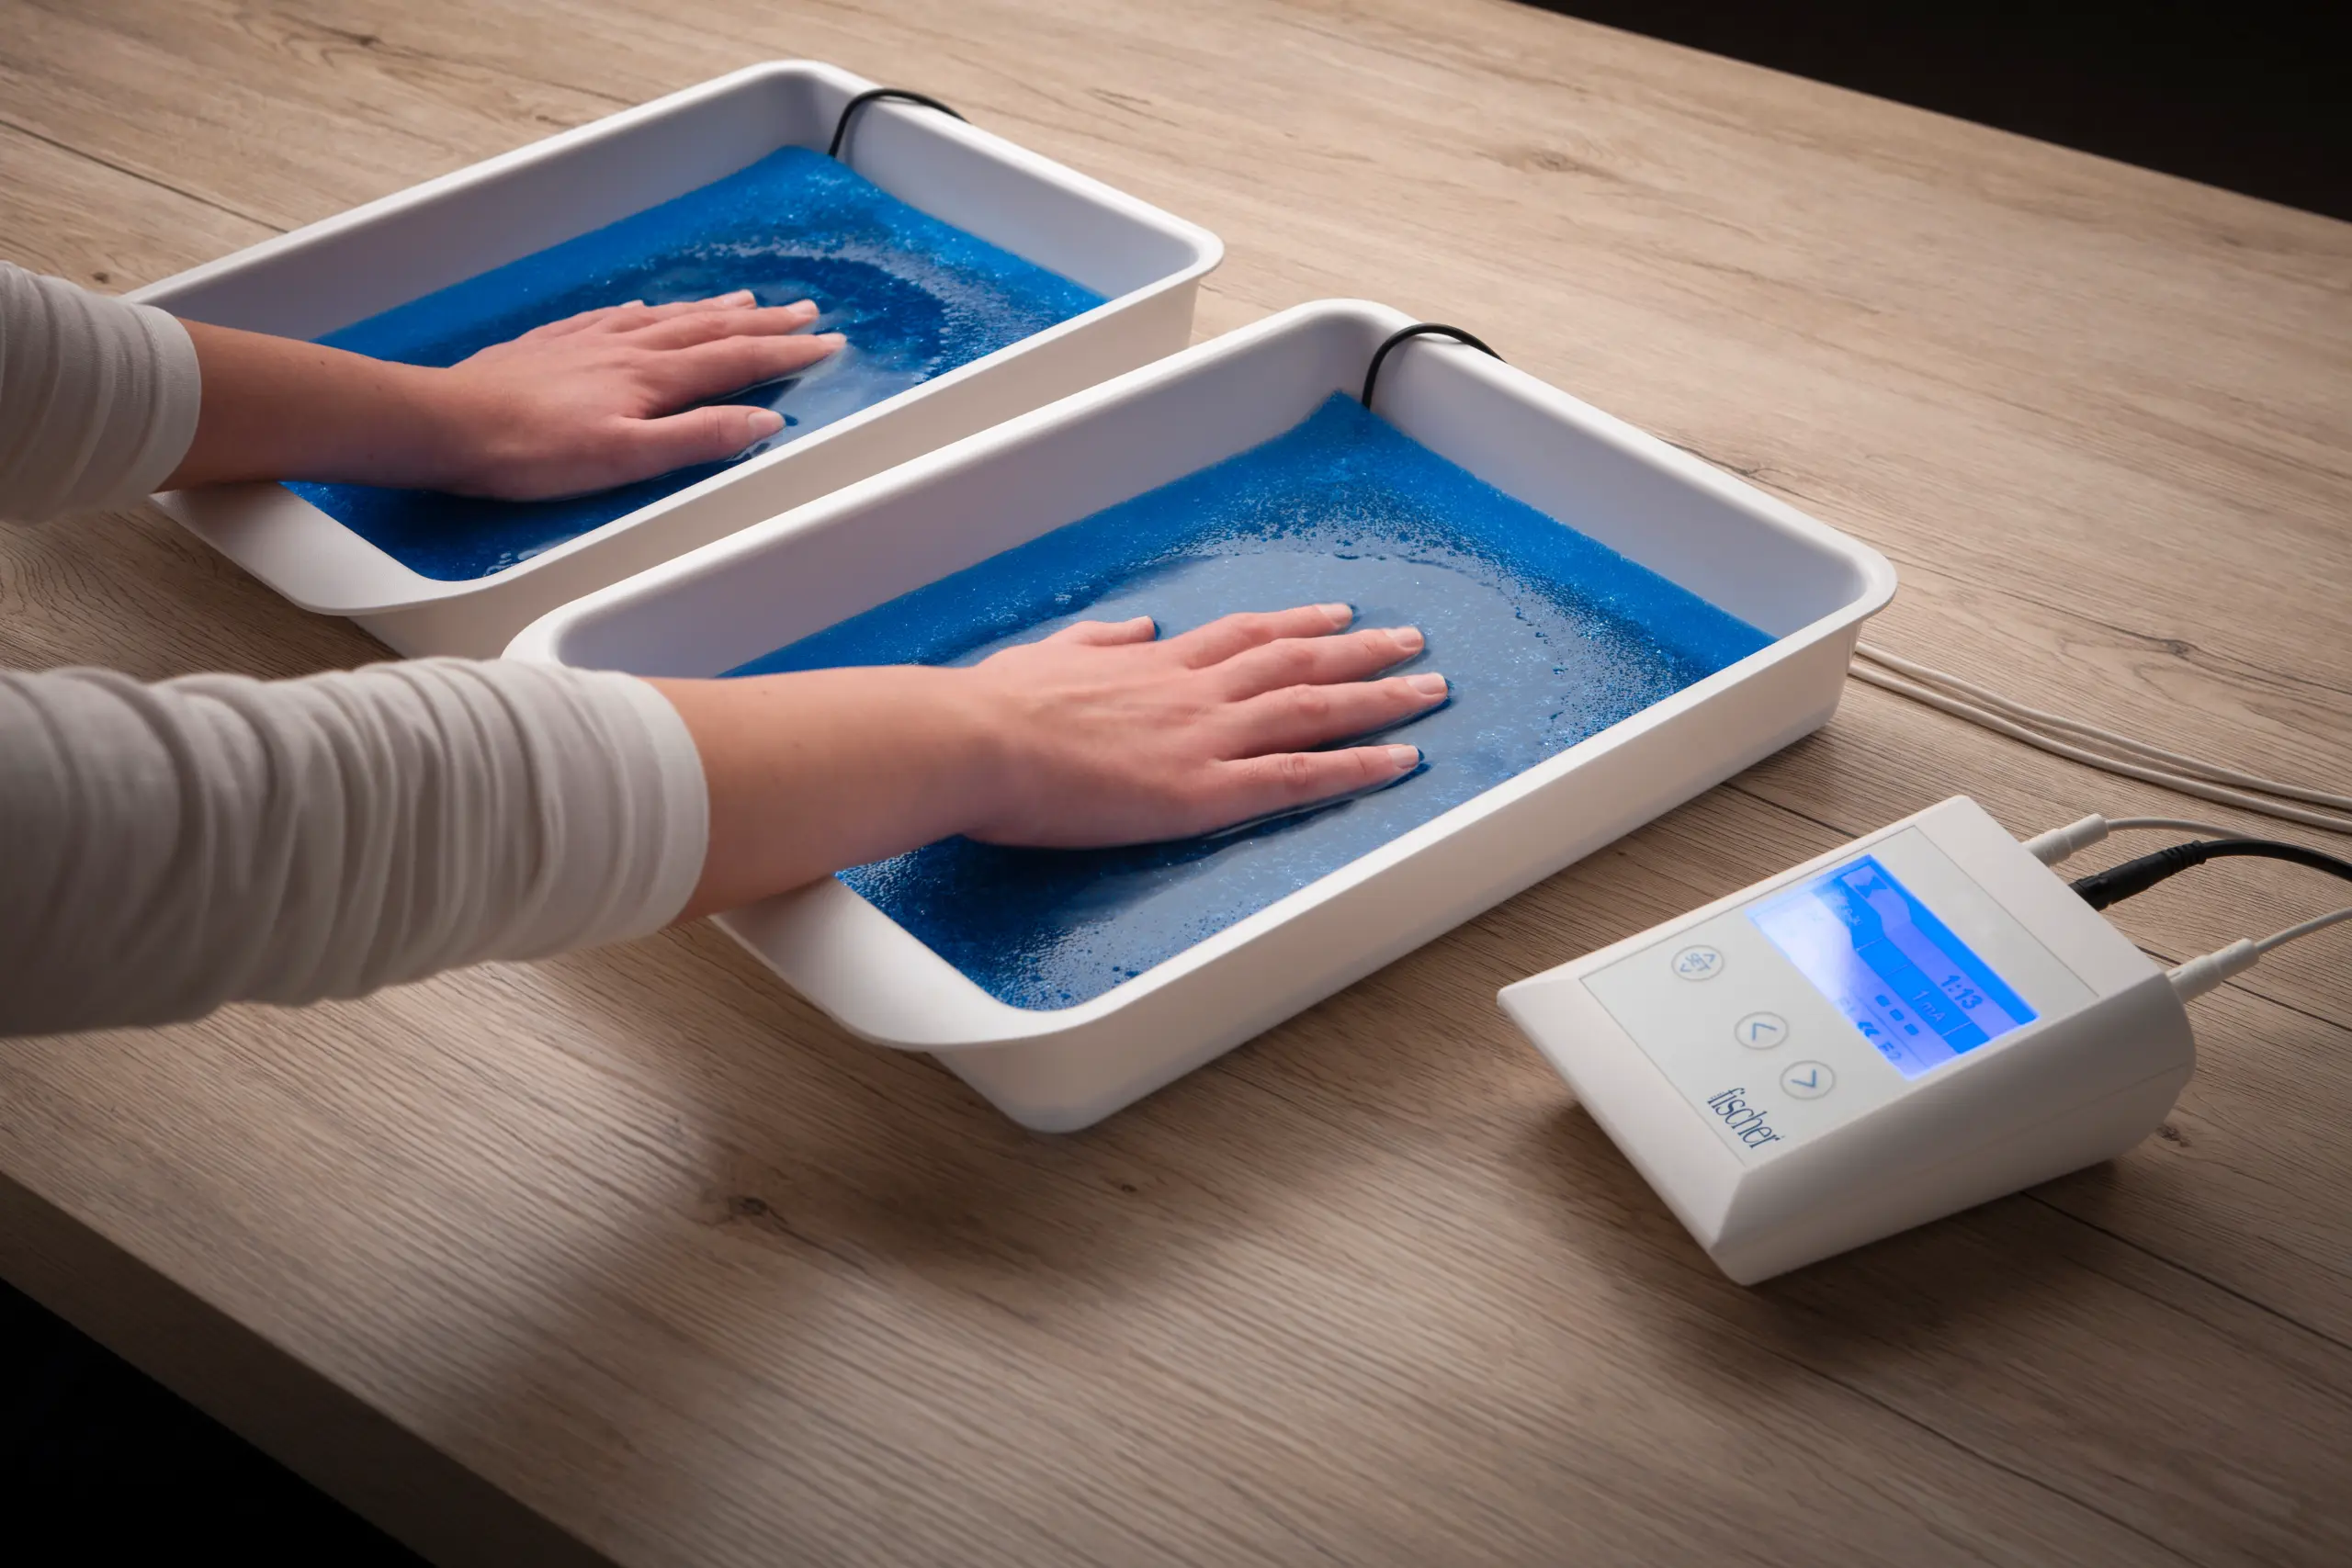 In this overhead photograph, we exclusively focus on the arms and hands of an individual facing forward while effectively addressing palmar hyperhidrosis, characterized by excessive hand sweating. They are utilizing RA Fischer Co.'s The Fischer iontophoresis device, strategically positioned on a white table. The scene highlights the device's key elements: white water bath trays, black metal-free silicone electrodes containing pH-balancing foam, all set against a plain white background. The Fischer iontophoresis device features a white rectangular design with a blue and grey screen, including buttons labeled "SET" and directional arrows, while the Fischer logo is discreetly located in the bottom right corner.